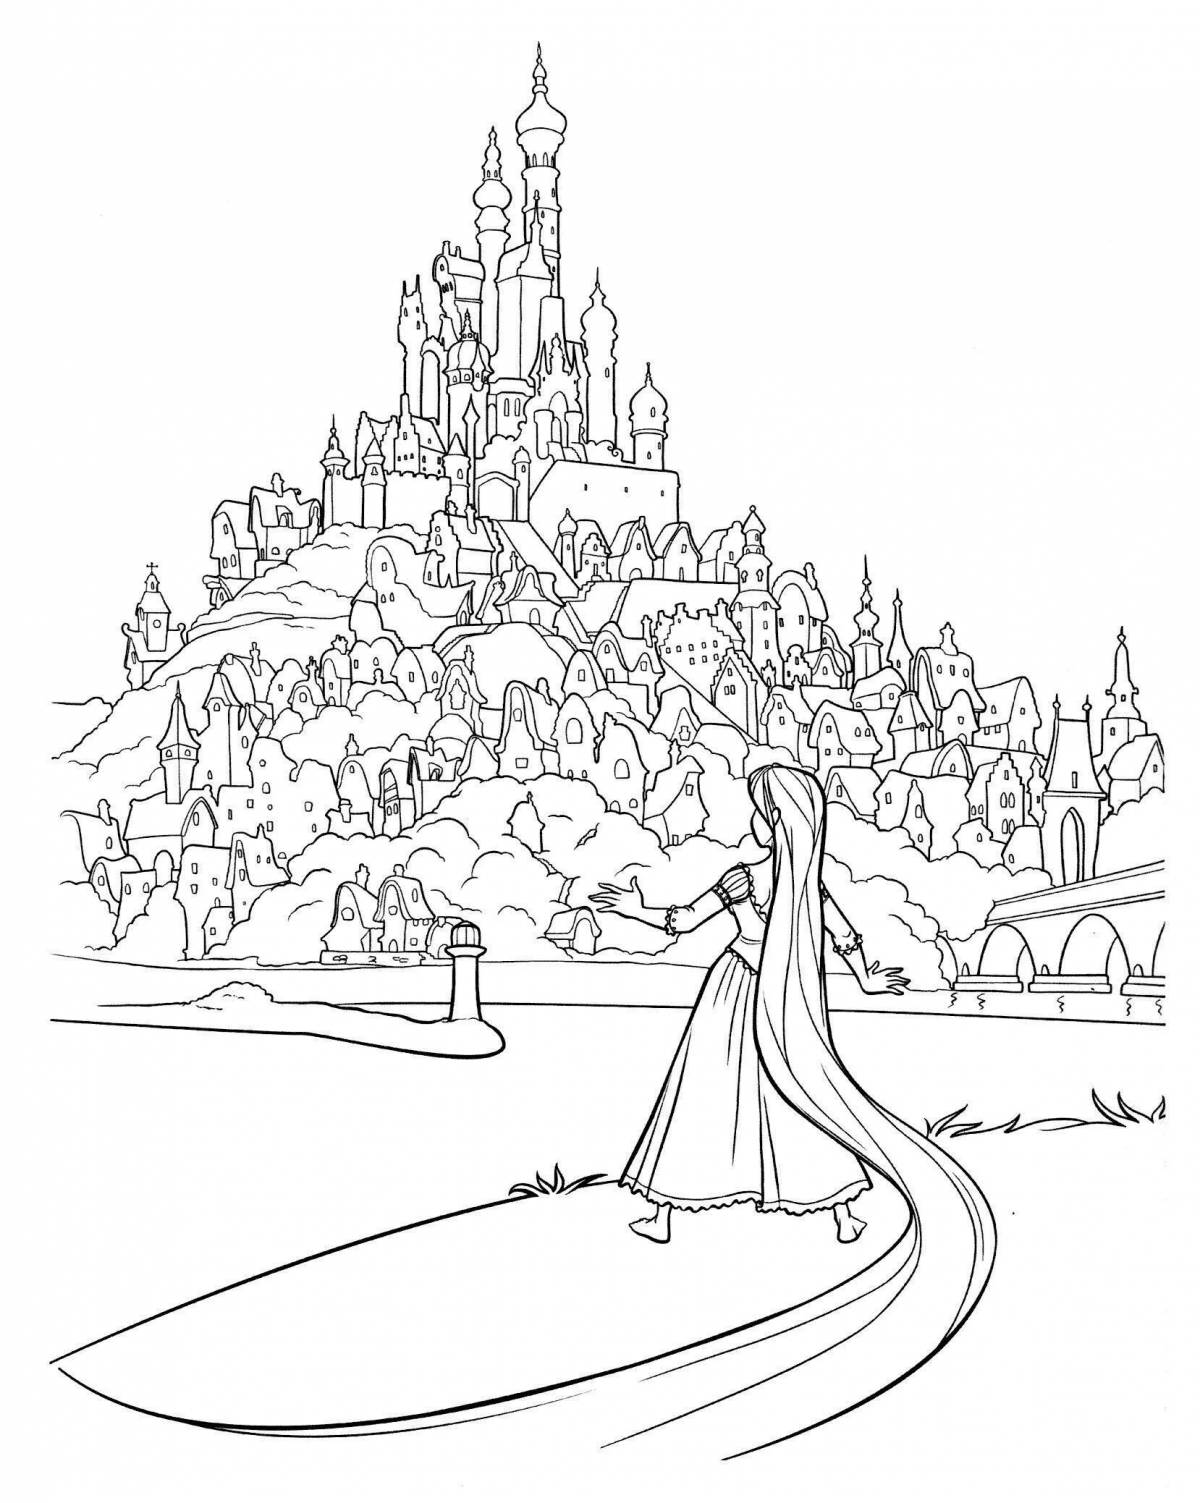 Coloring wavy castles for girls